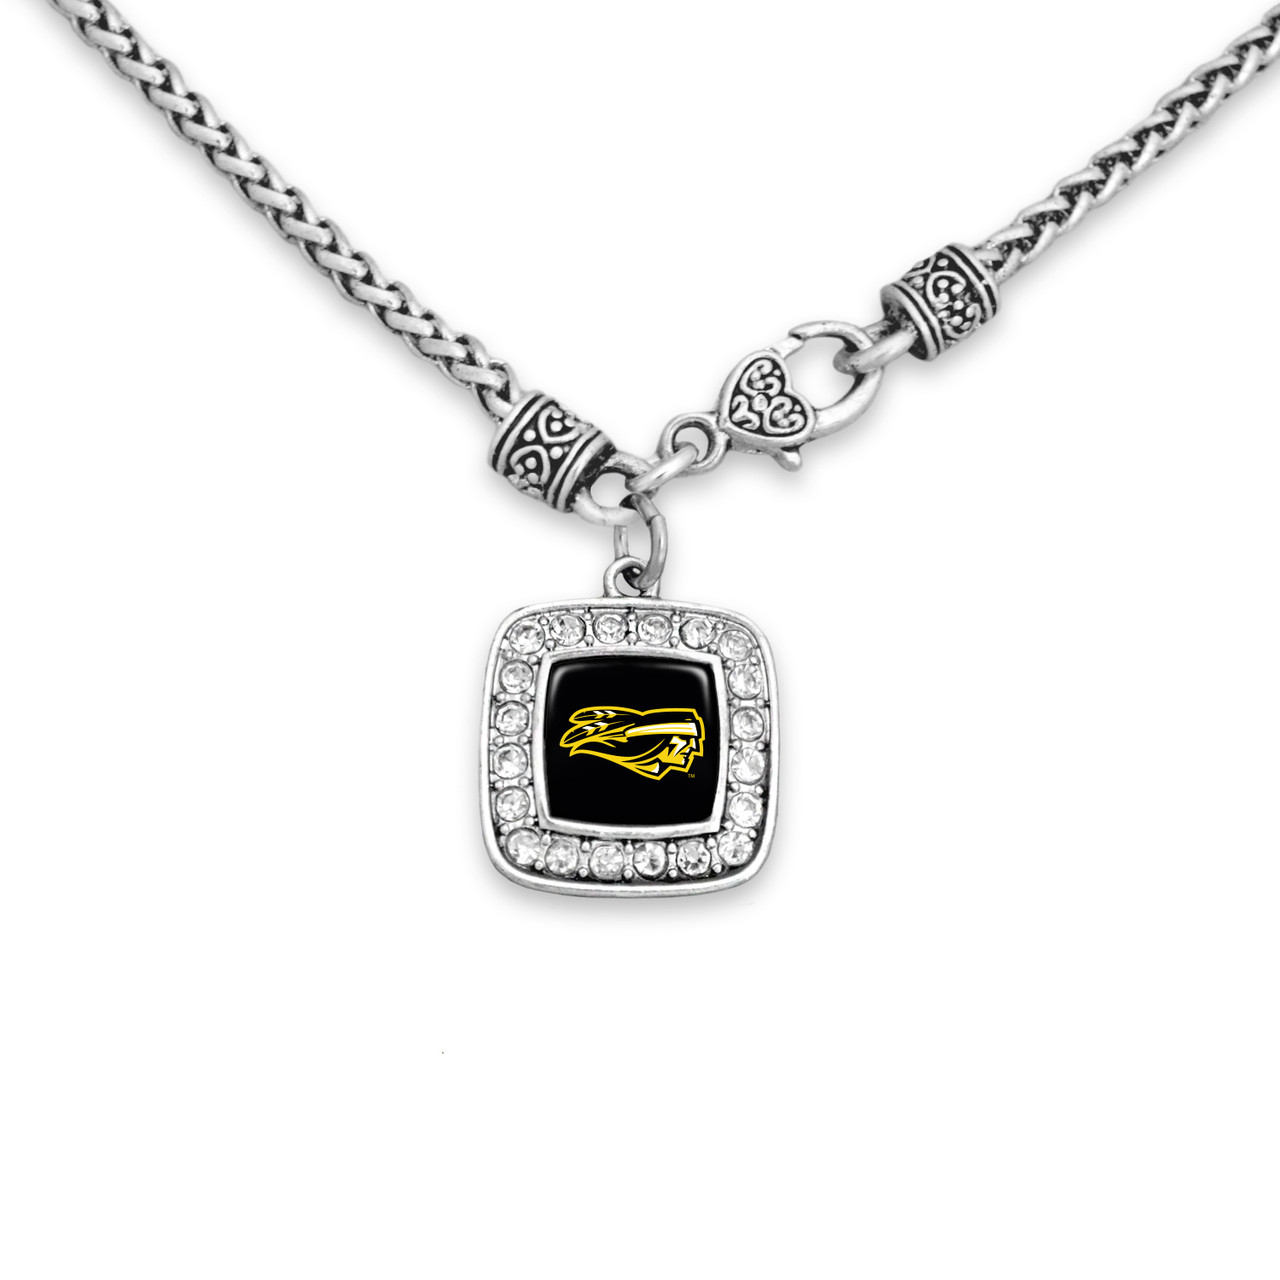 Tyler Apaches Necklace- Kassi